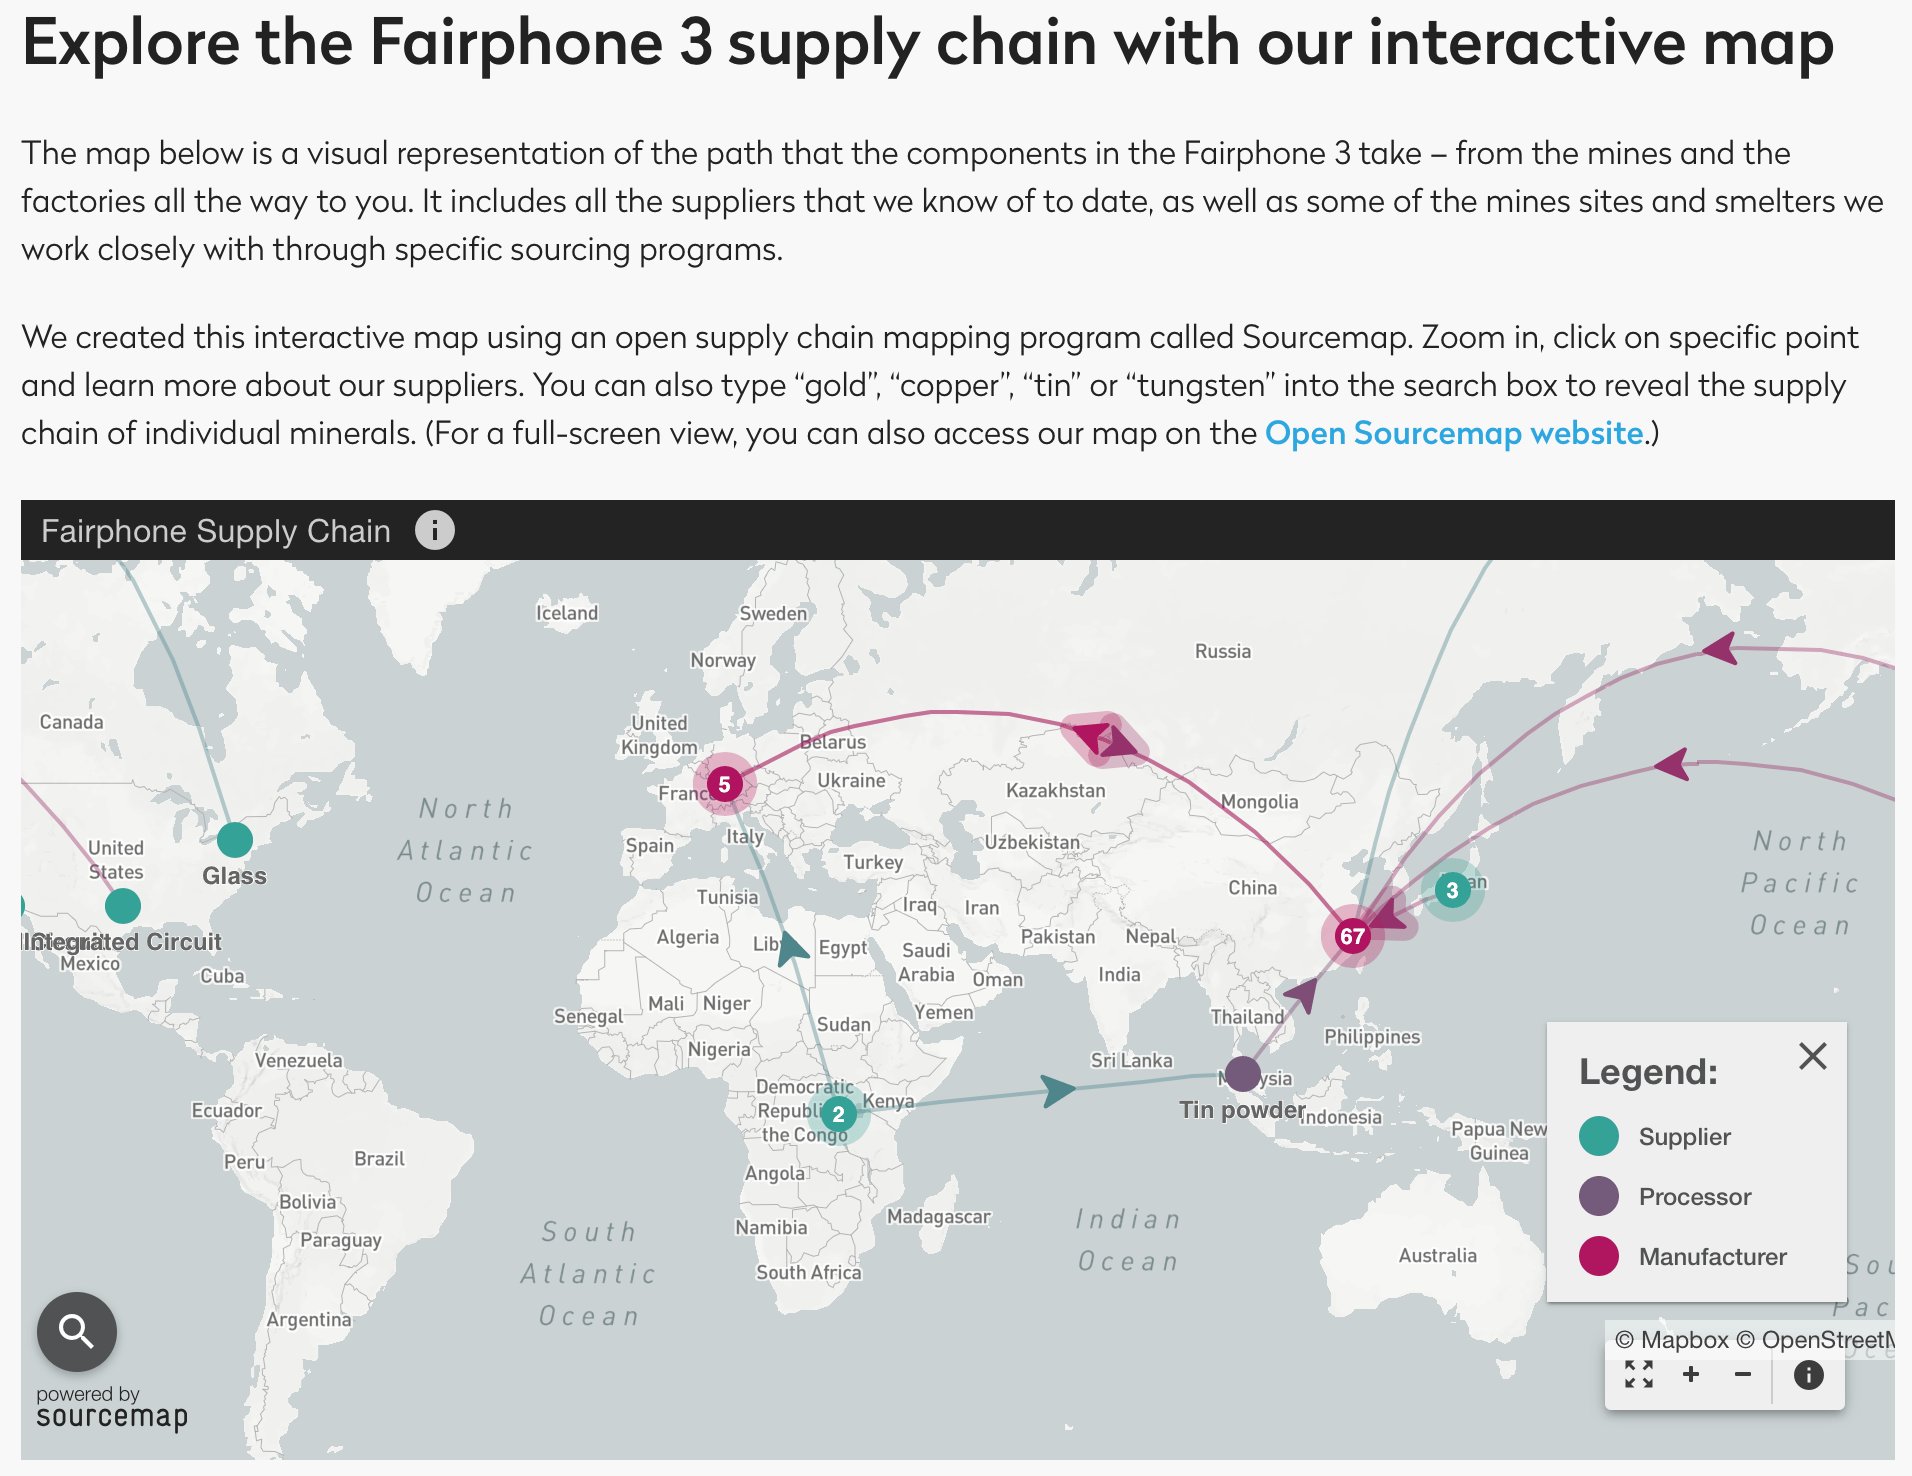 Map of the Fairphone supply Chain. Powered by Sourcemap. Legend: Supplier in green color, Processor in purple color, Manufacturer in magenta color. 5 in the Nederlands, 67 in Taiwan, 2 in Congo, 3 in Japan, 1 in Singapore, 